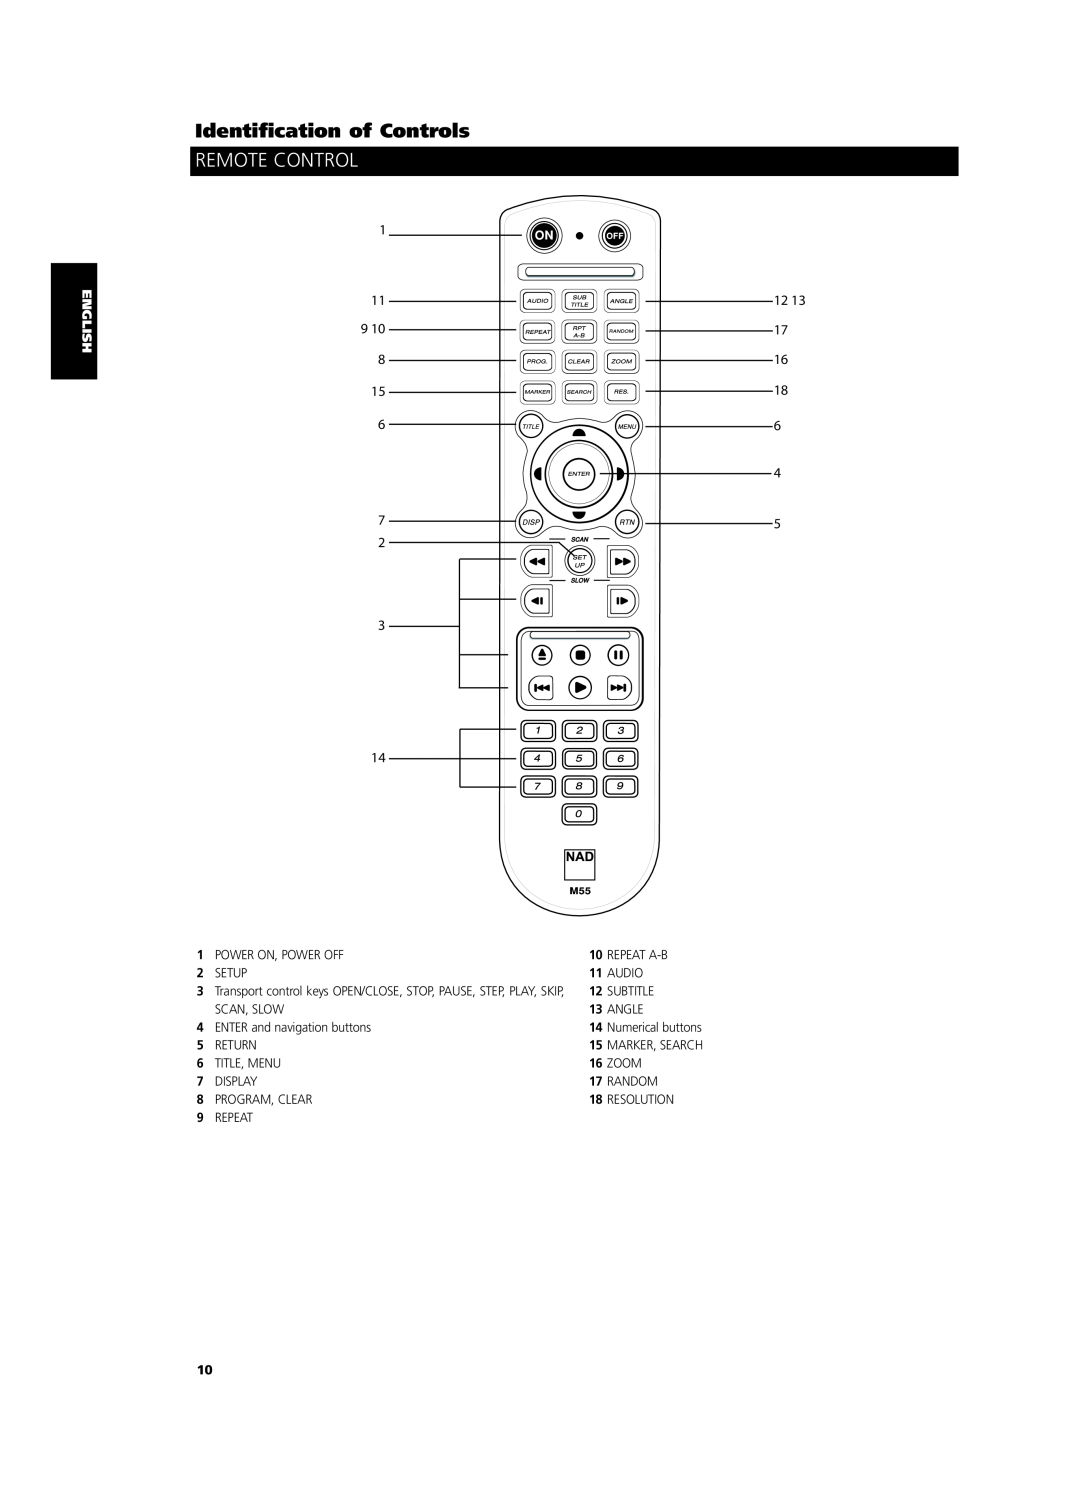 NAD M55 Remote Control, Identification of Controls, Power On, Power Off, Repeat A-B, Setup, Audio, Subtitle, Scan, Slow 